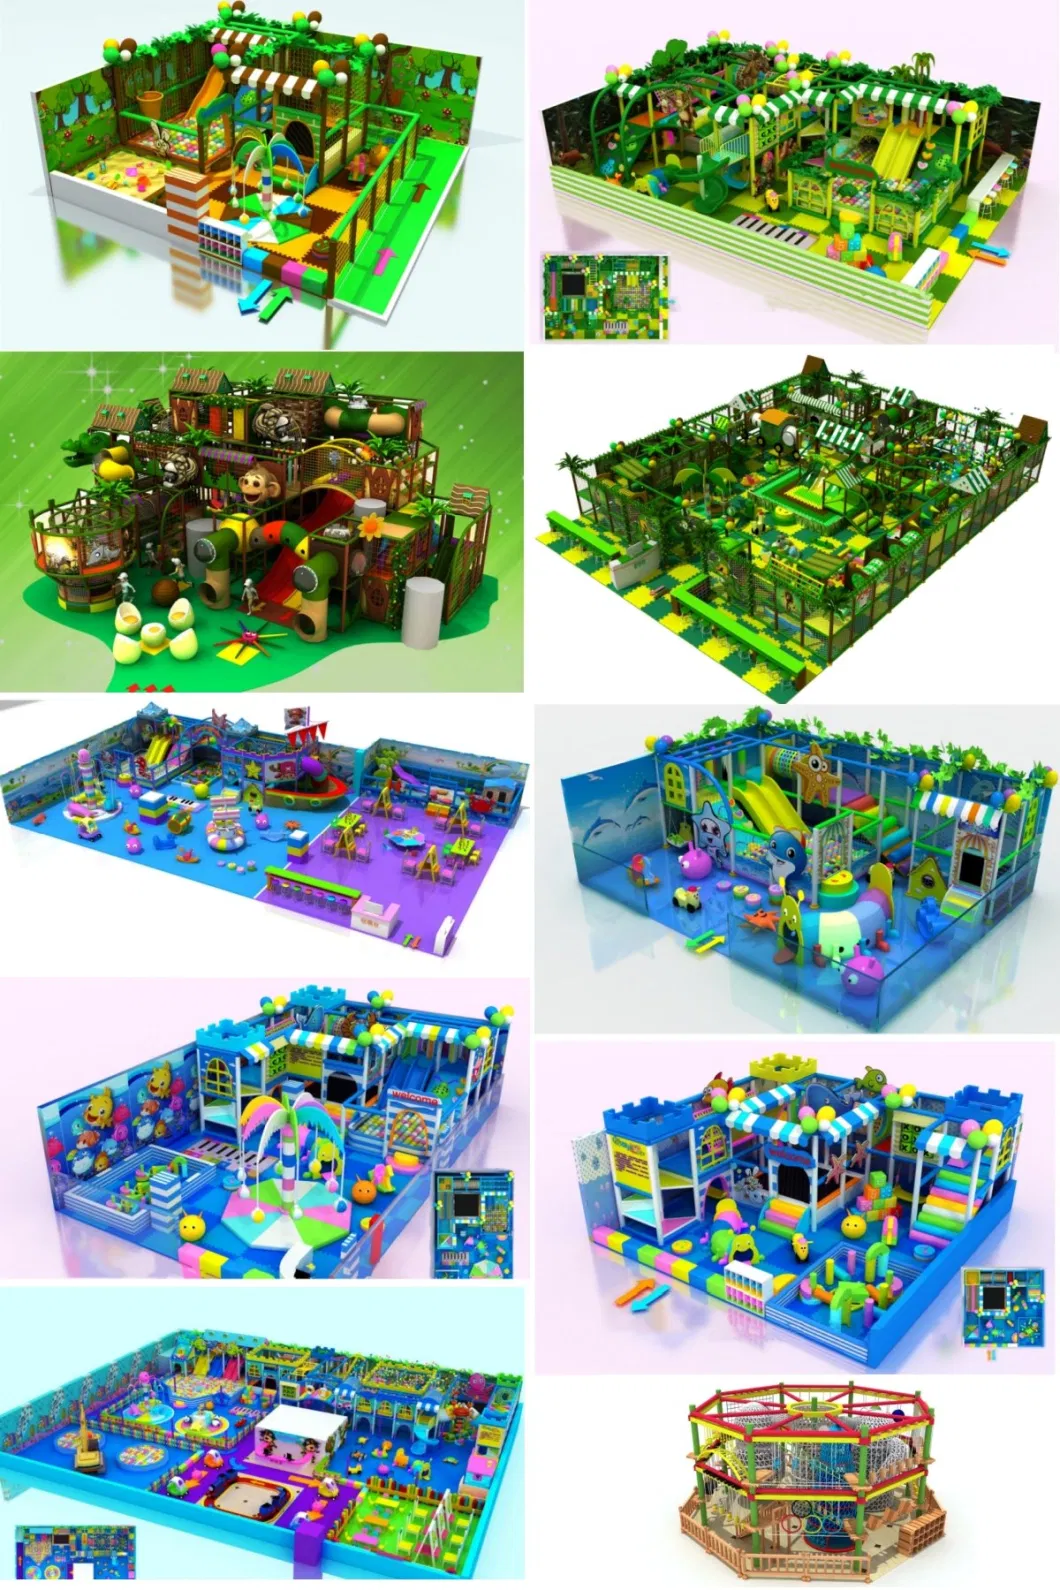 Soft Play Equipment Indoor Plastic Toy Entertainment Toddler Playground Kids Climbing Frame Playset